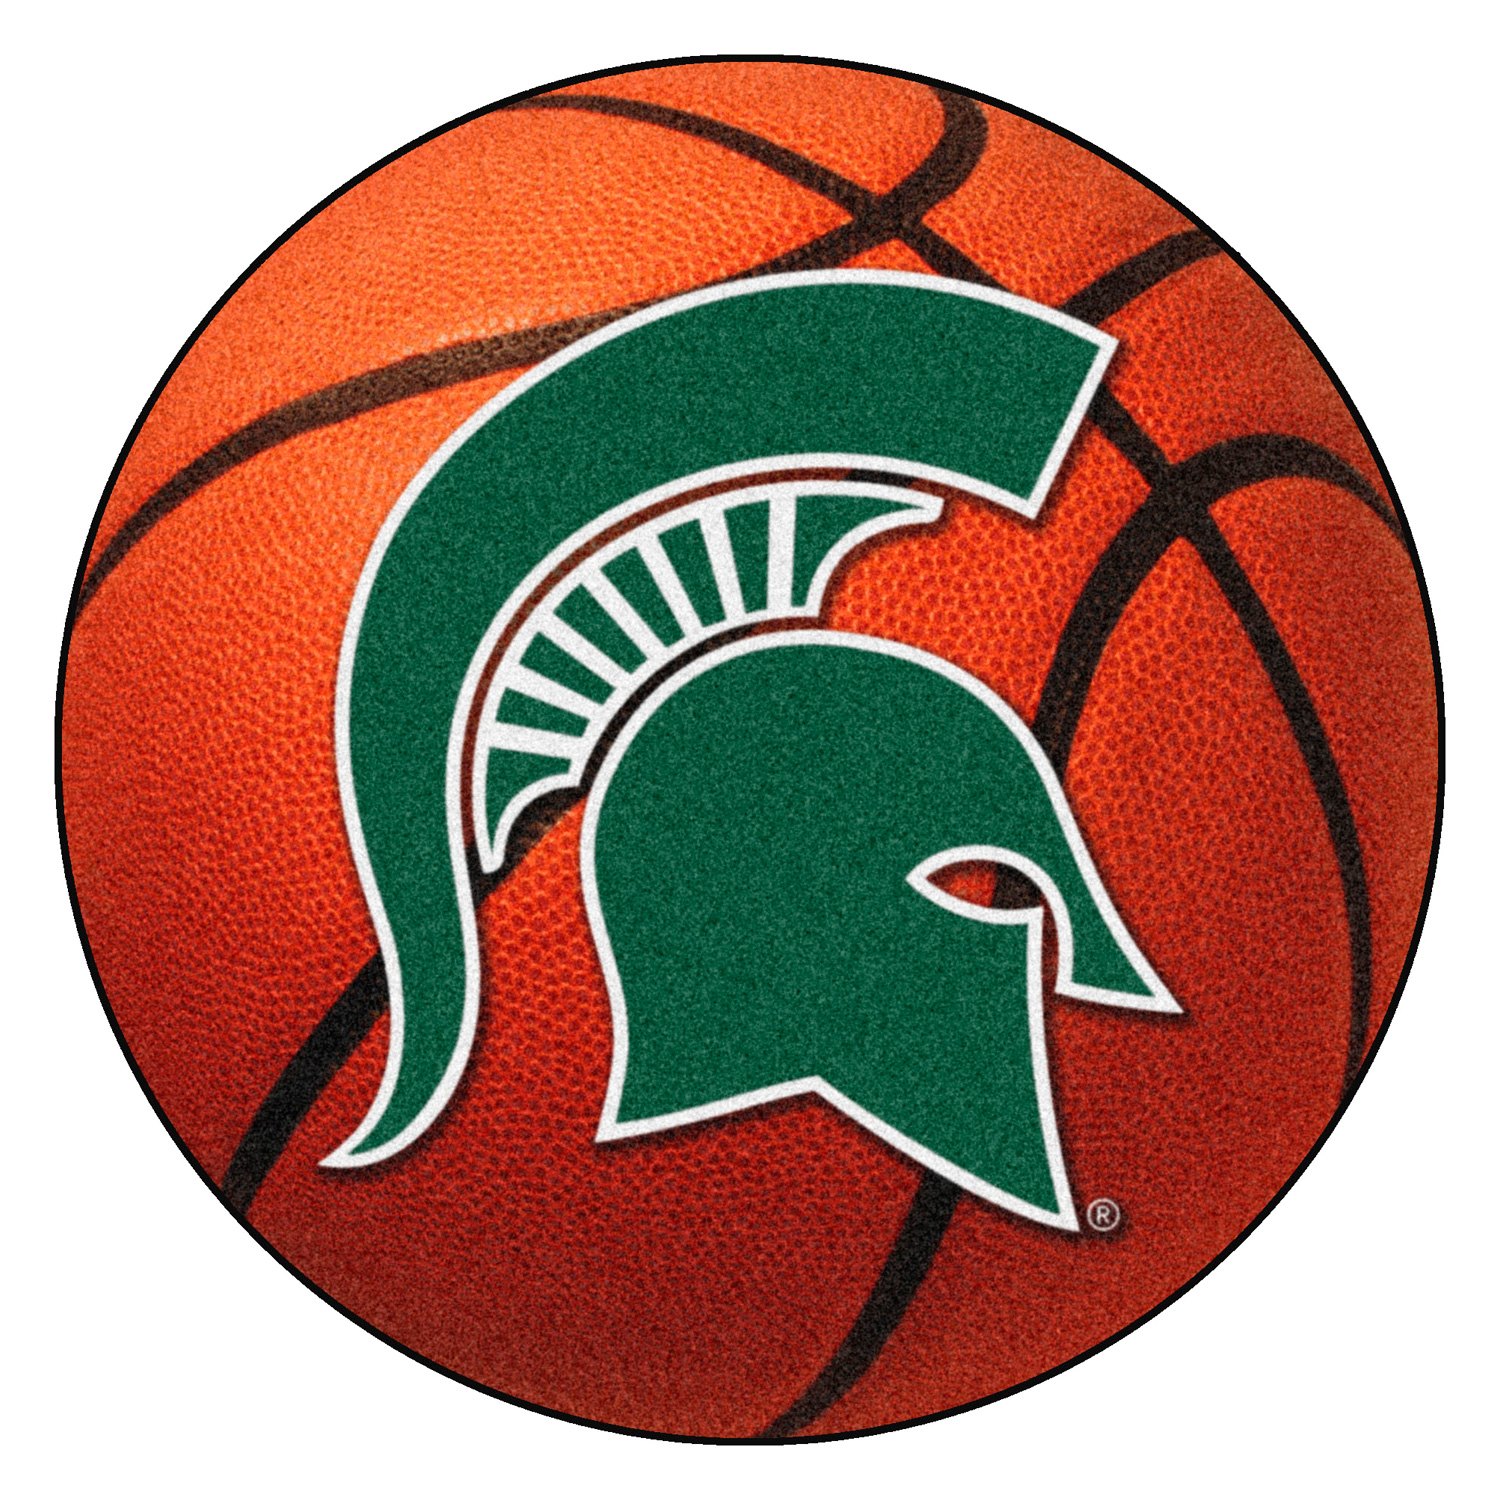 15x15 FANMATS 14864 NCAA Michigan State University Spartans Polyester Steering Wheel Cover 